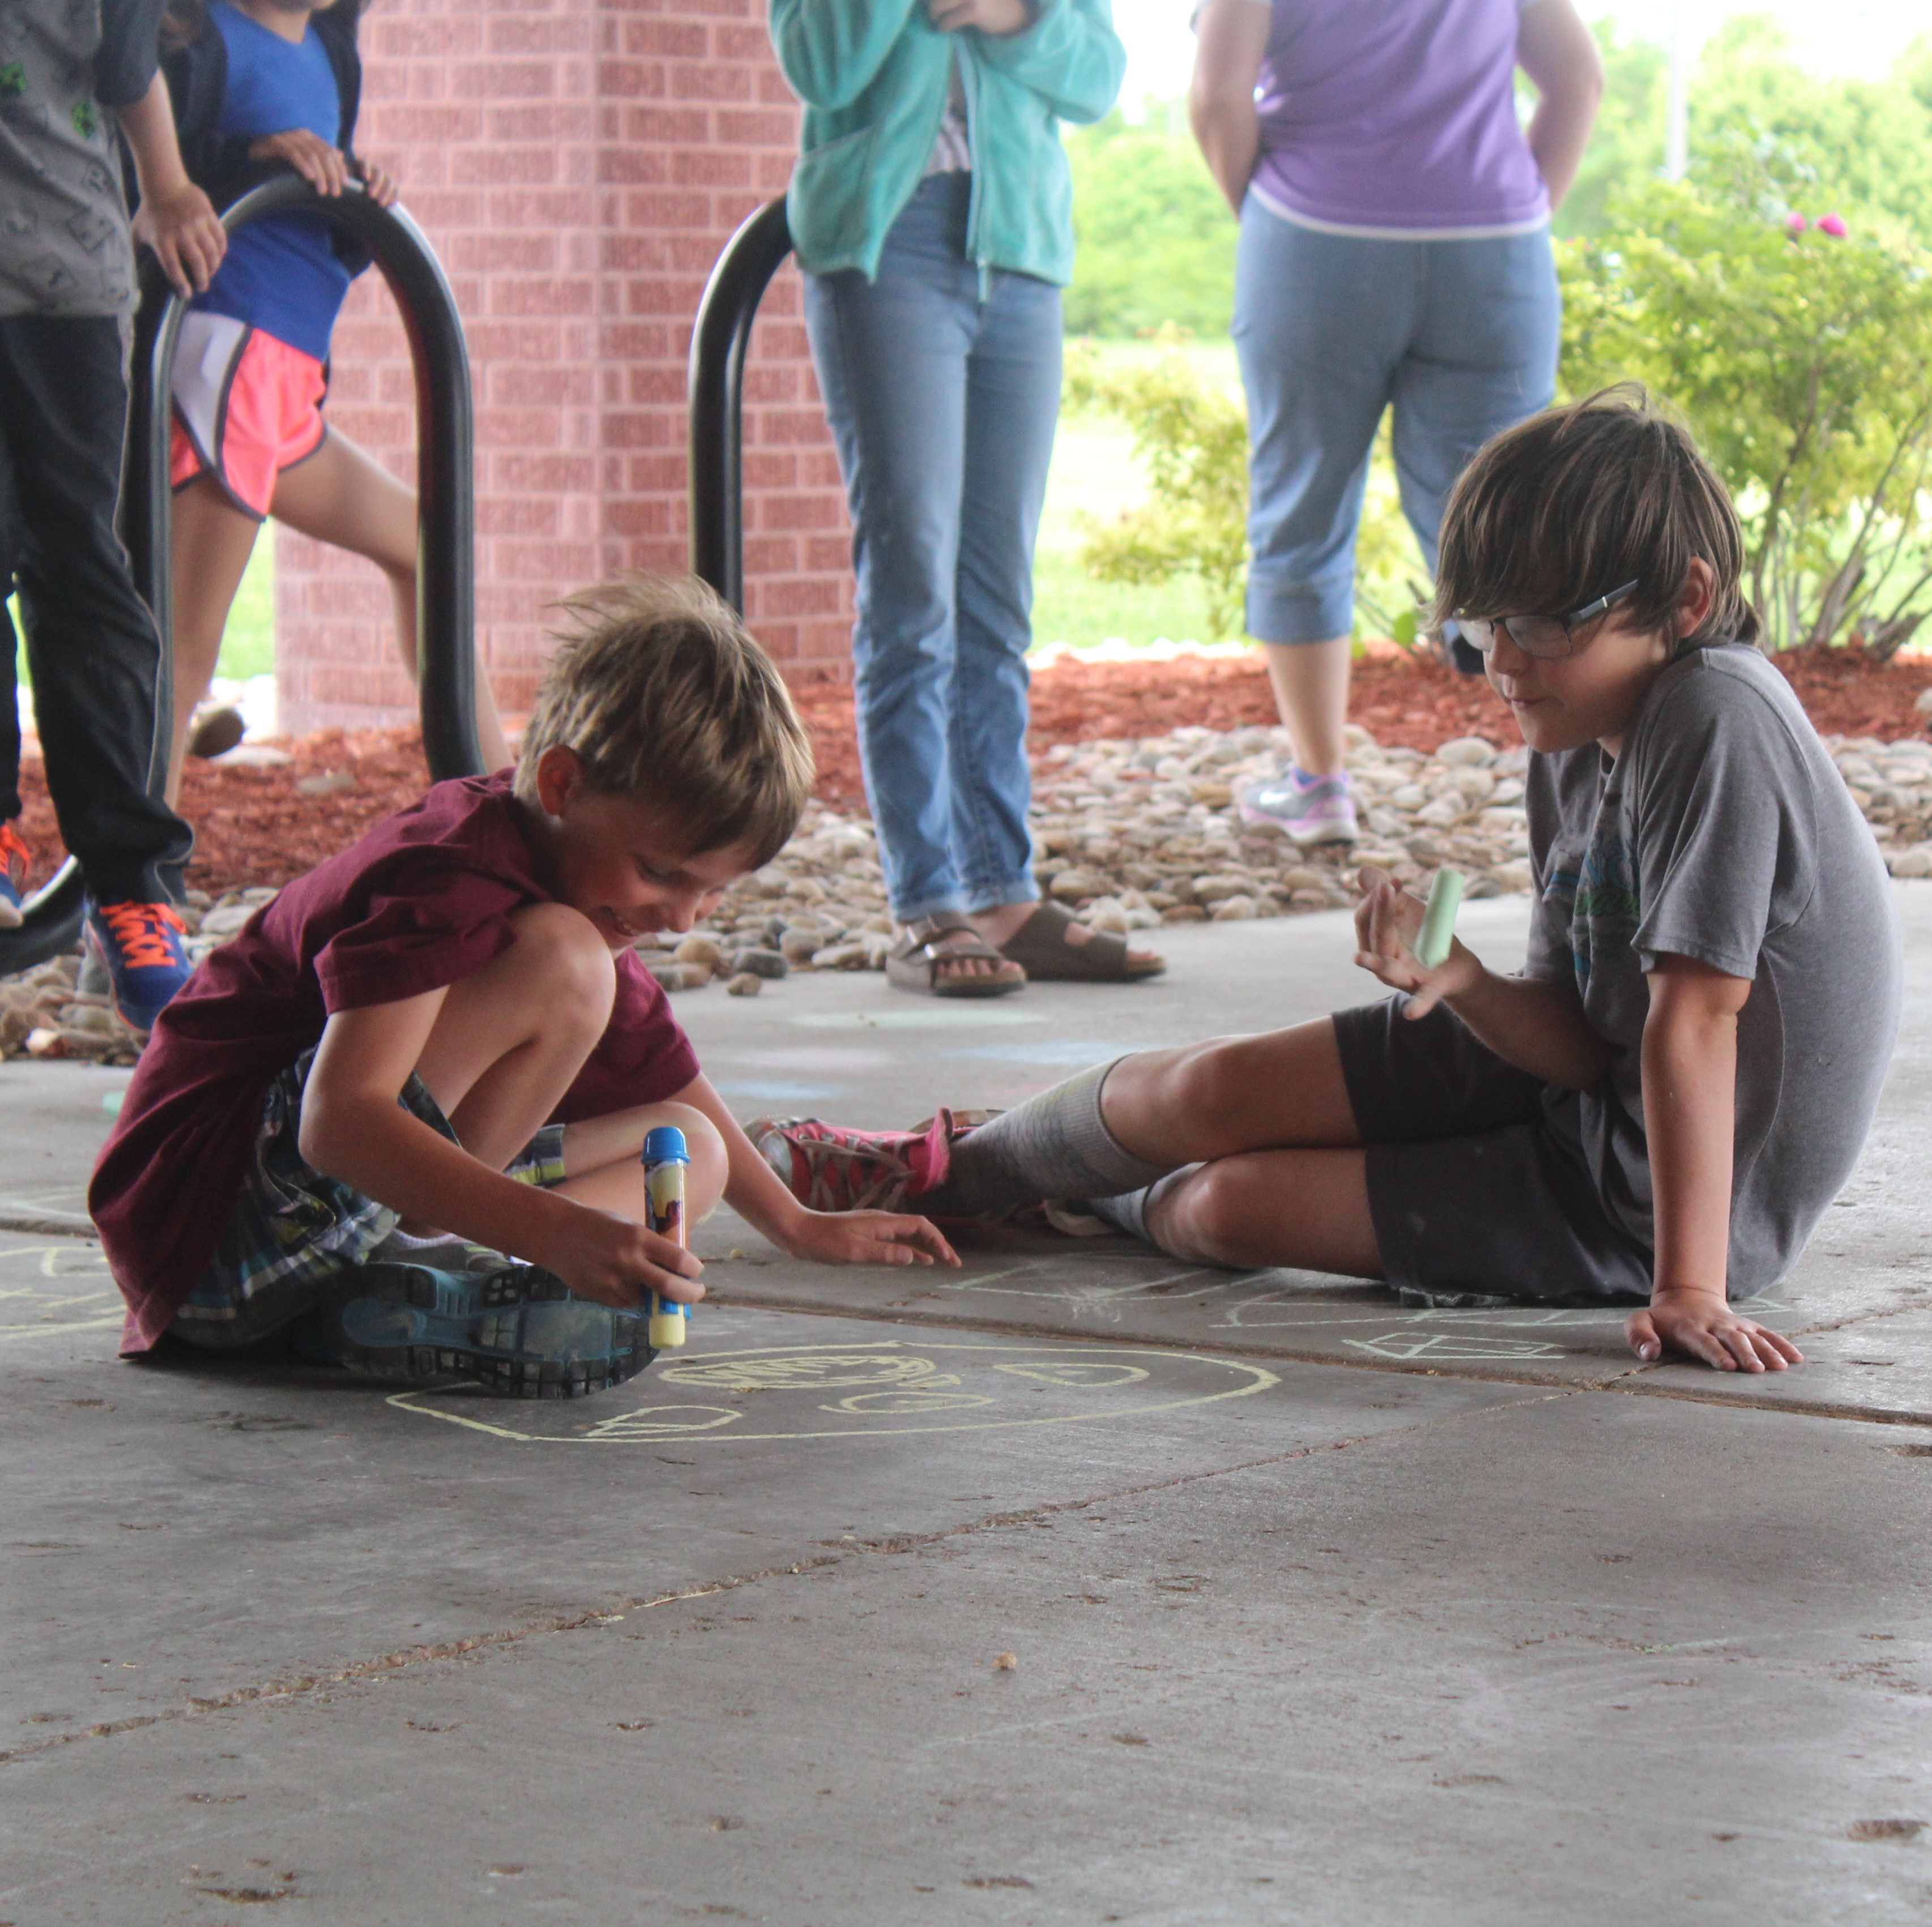 BCE kids camp photo of children drawing with chalk on concrete. 